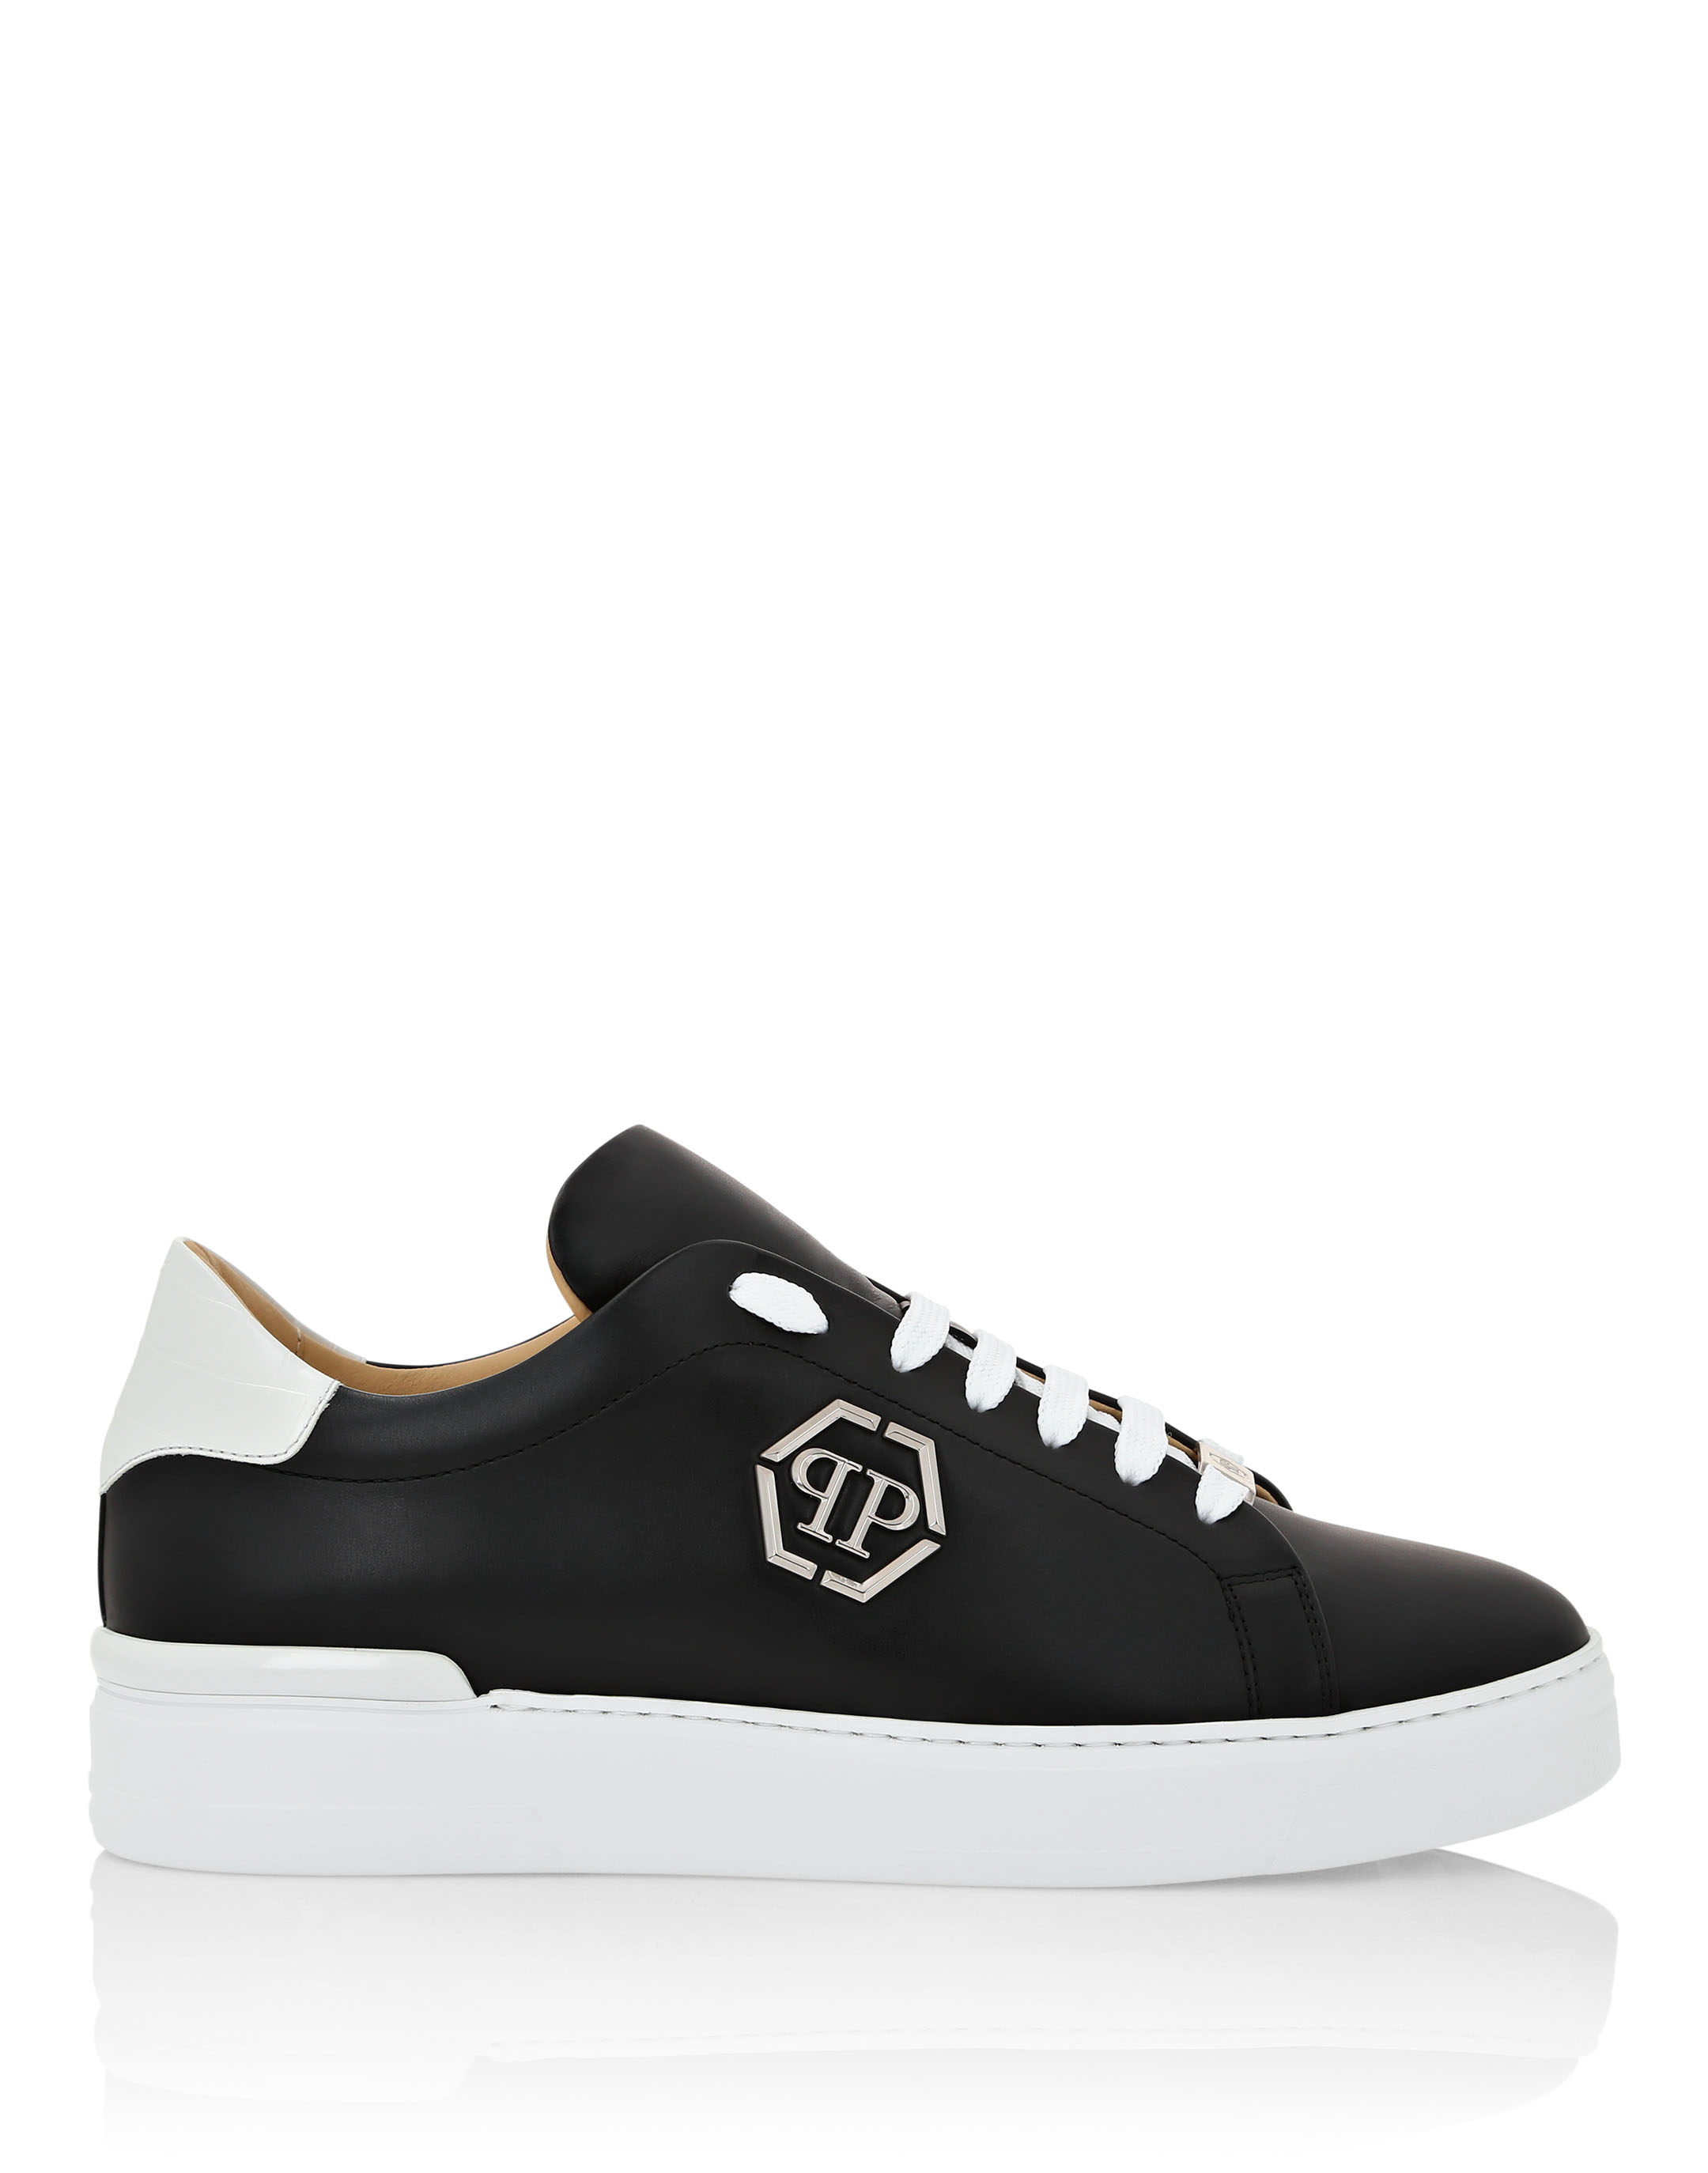 Lo-Top Sneakers Cocco Print Insert Hexagon | Philipp Plein Outlet